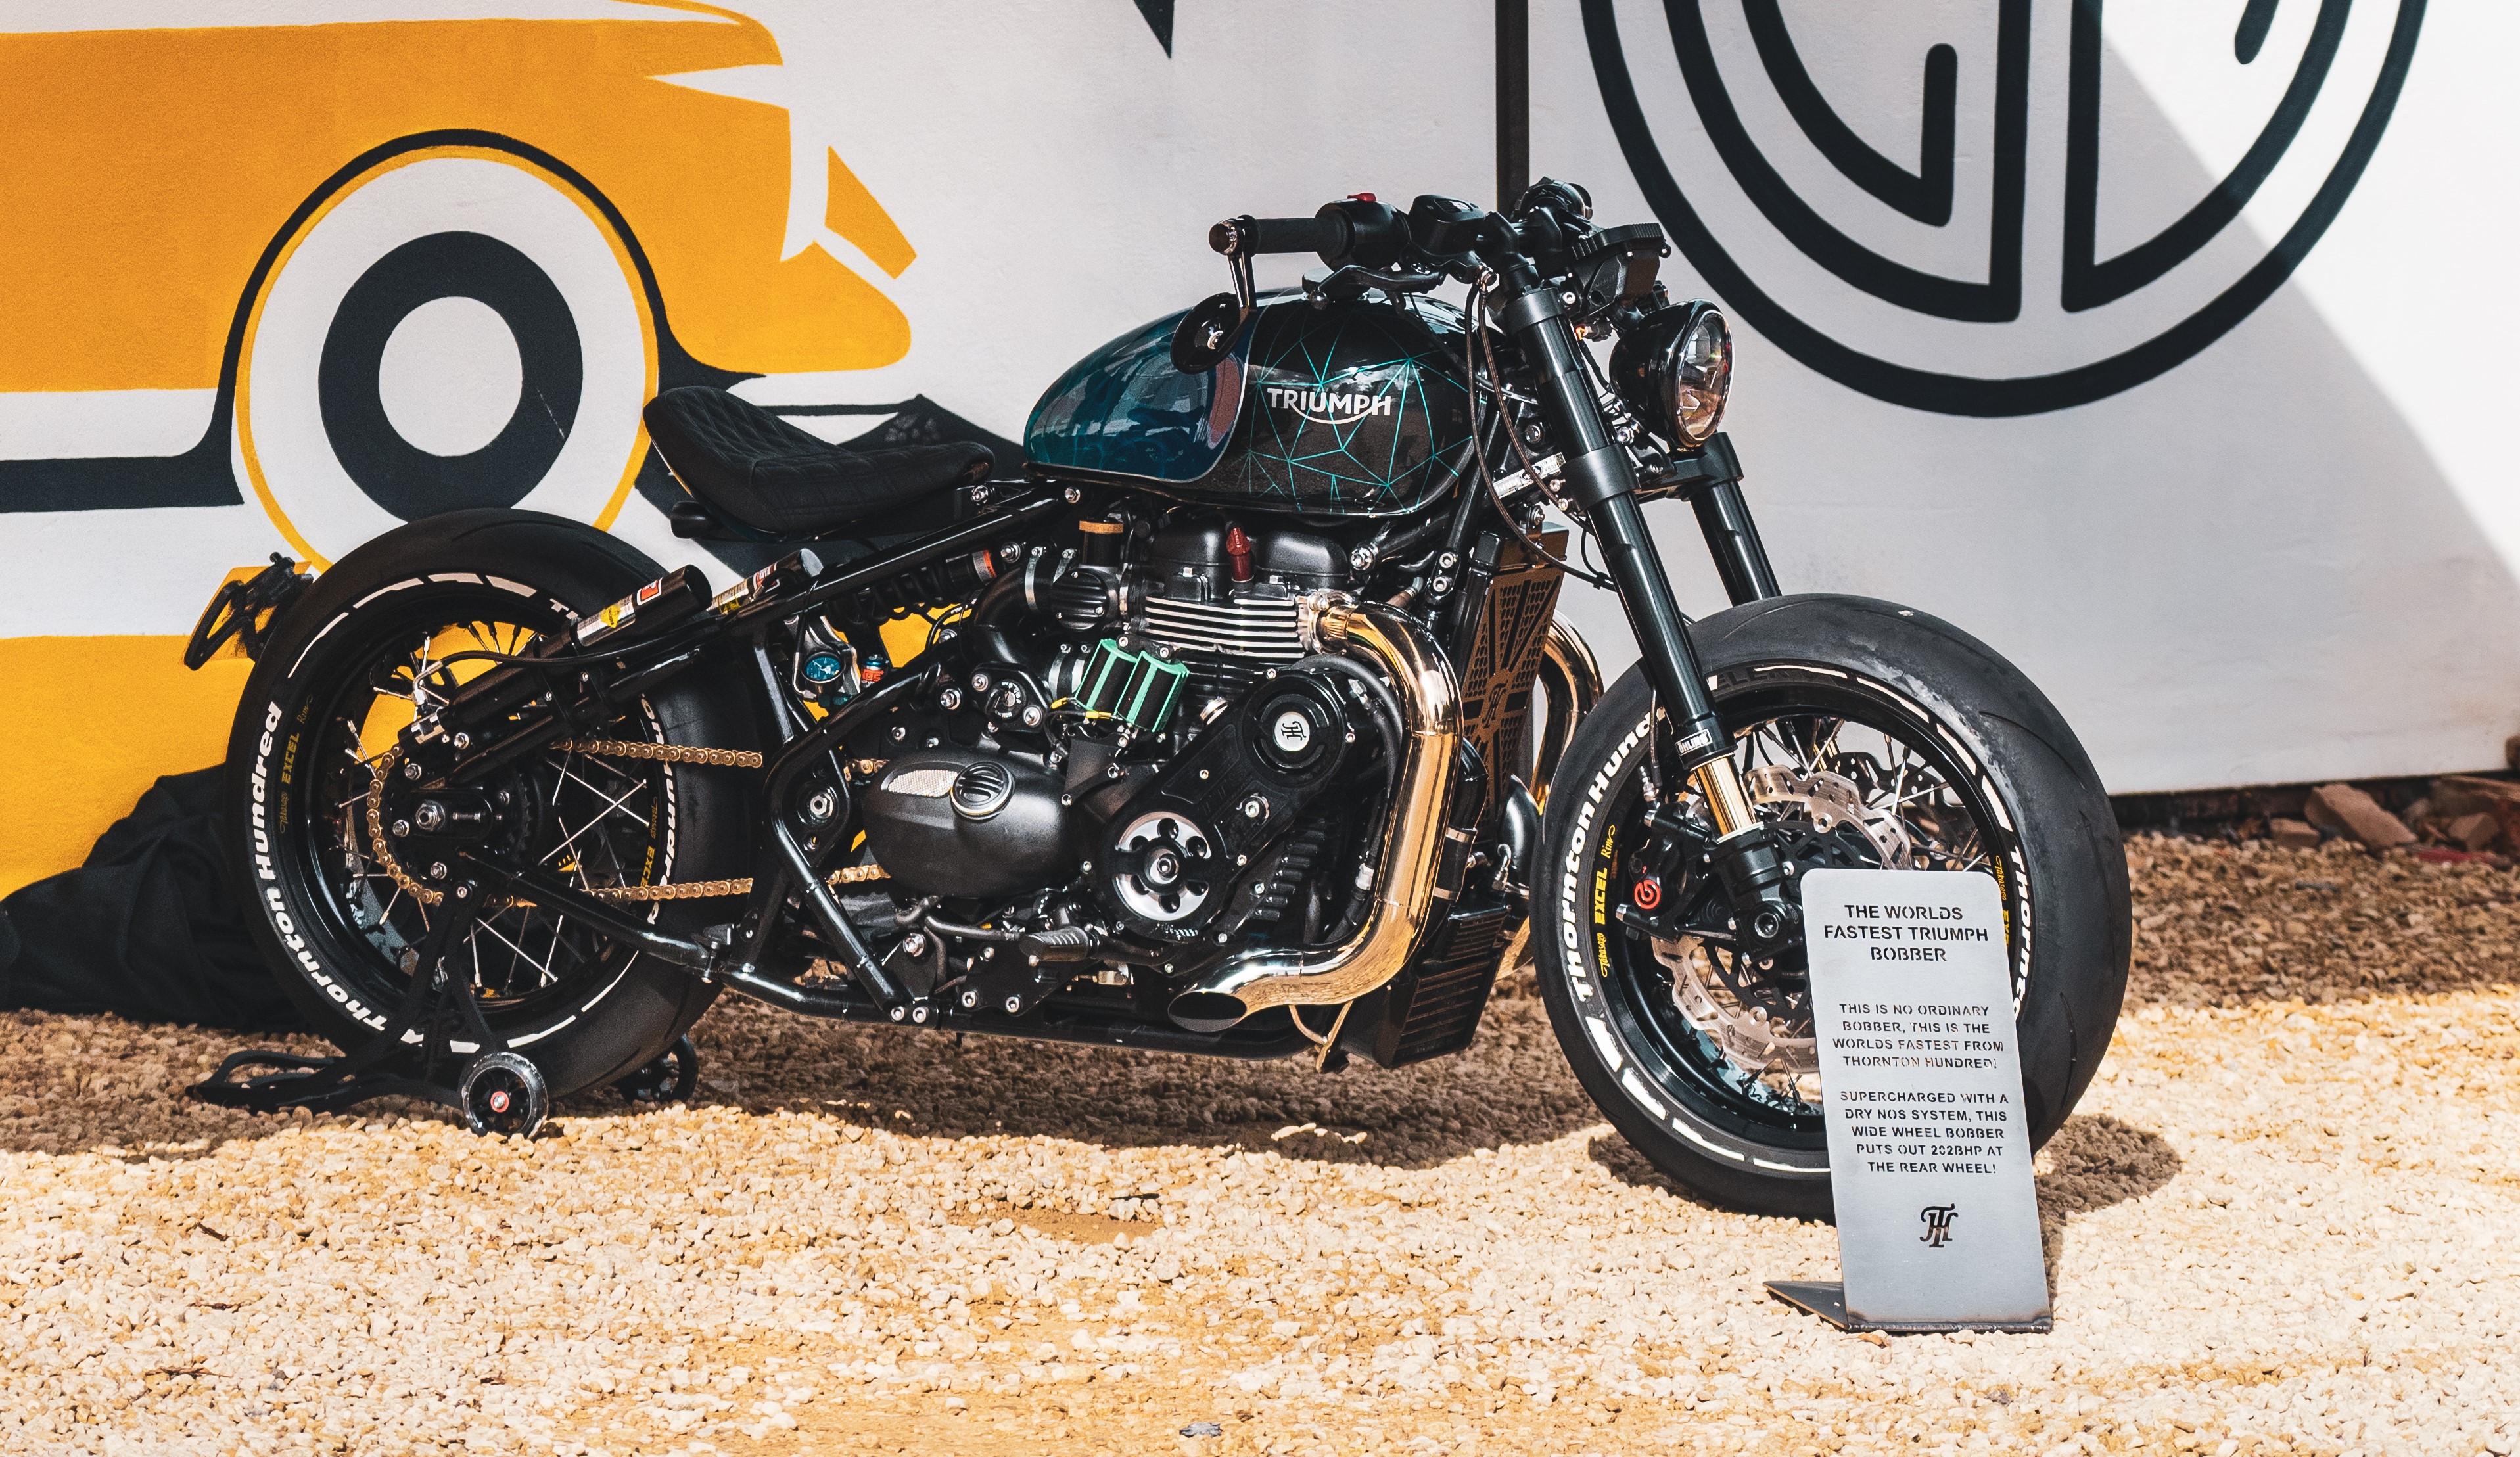 World's Fastest Triumph Bobber takes to the dragstrip